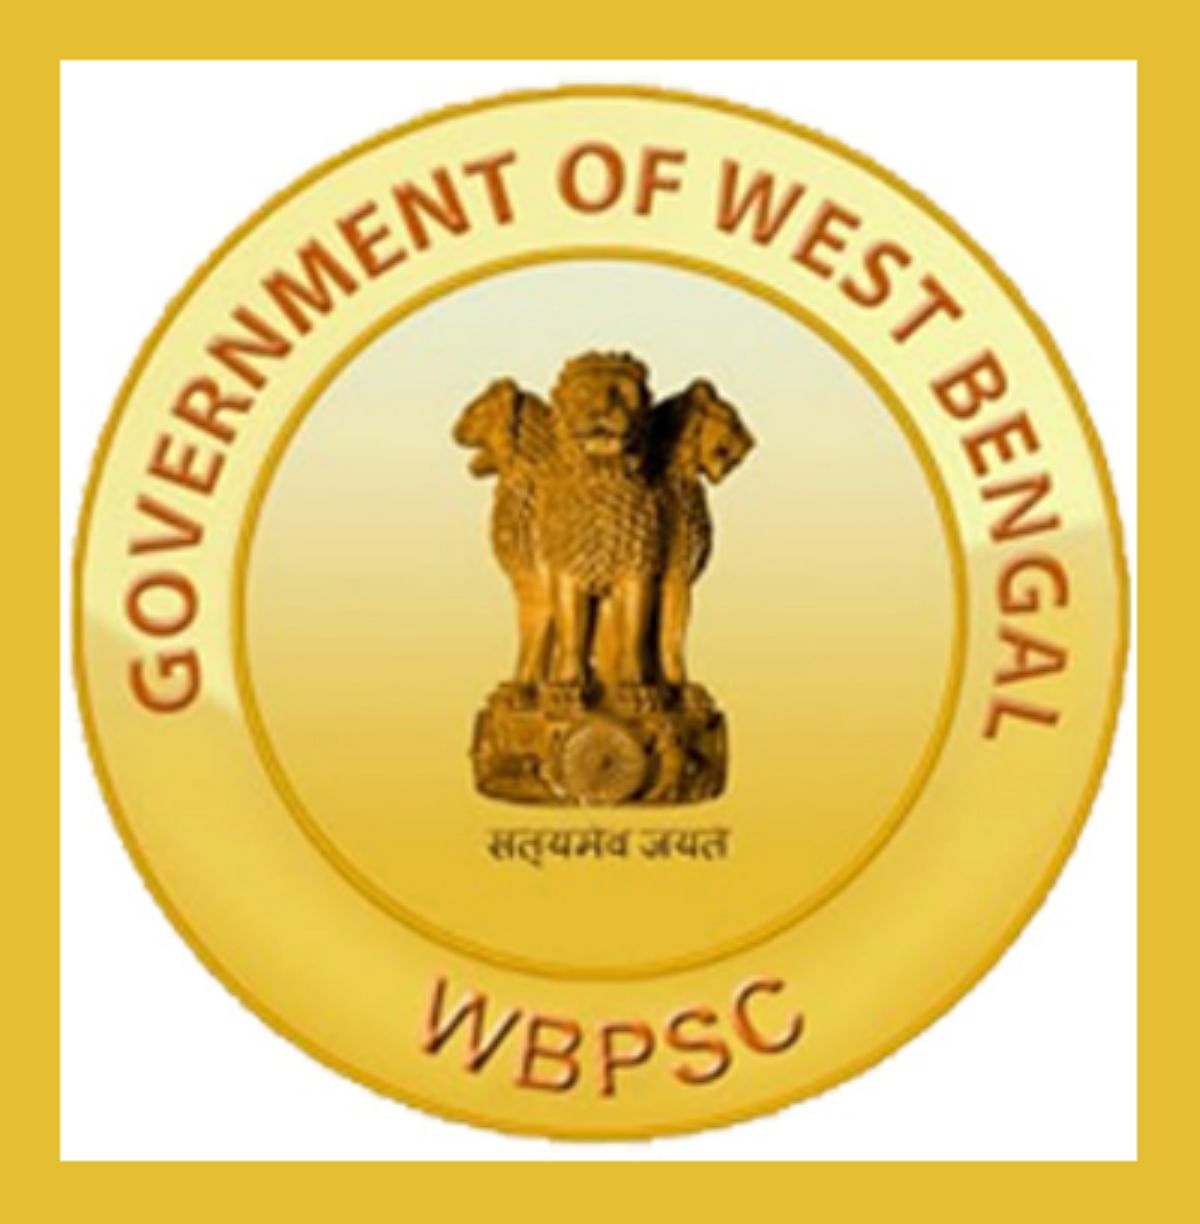 WBPSC Executive Result 2021 Declared for Group C Posts, Know How to Download Here